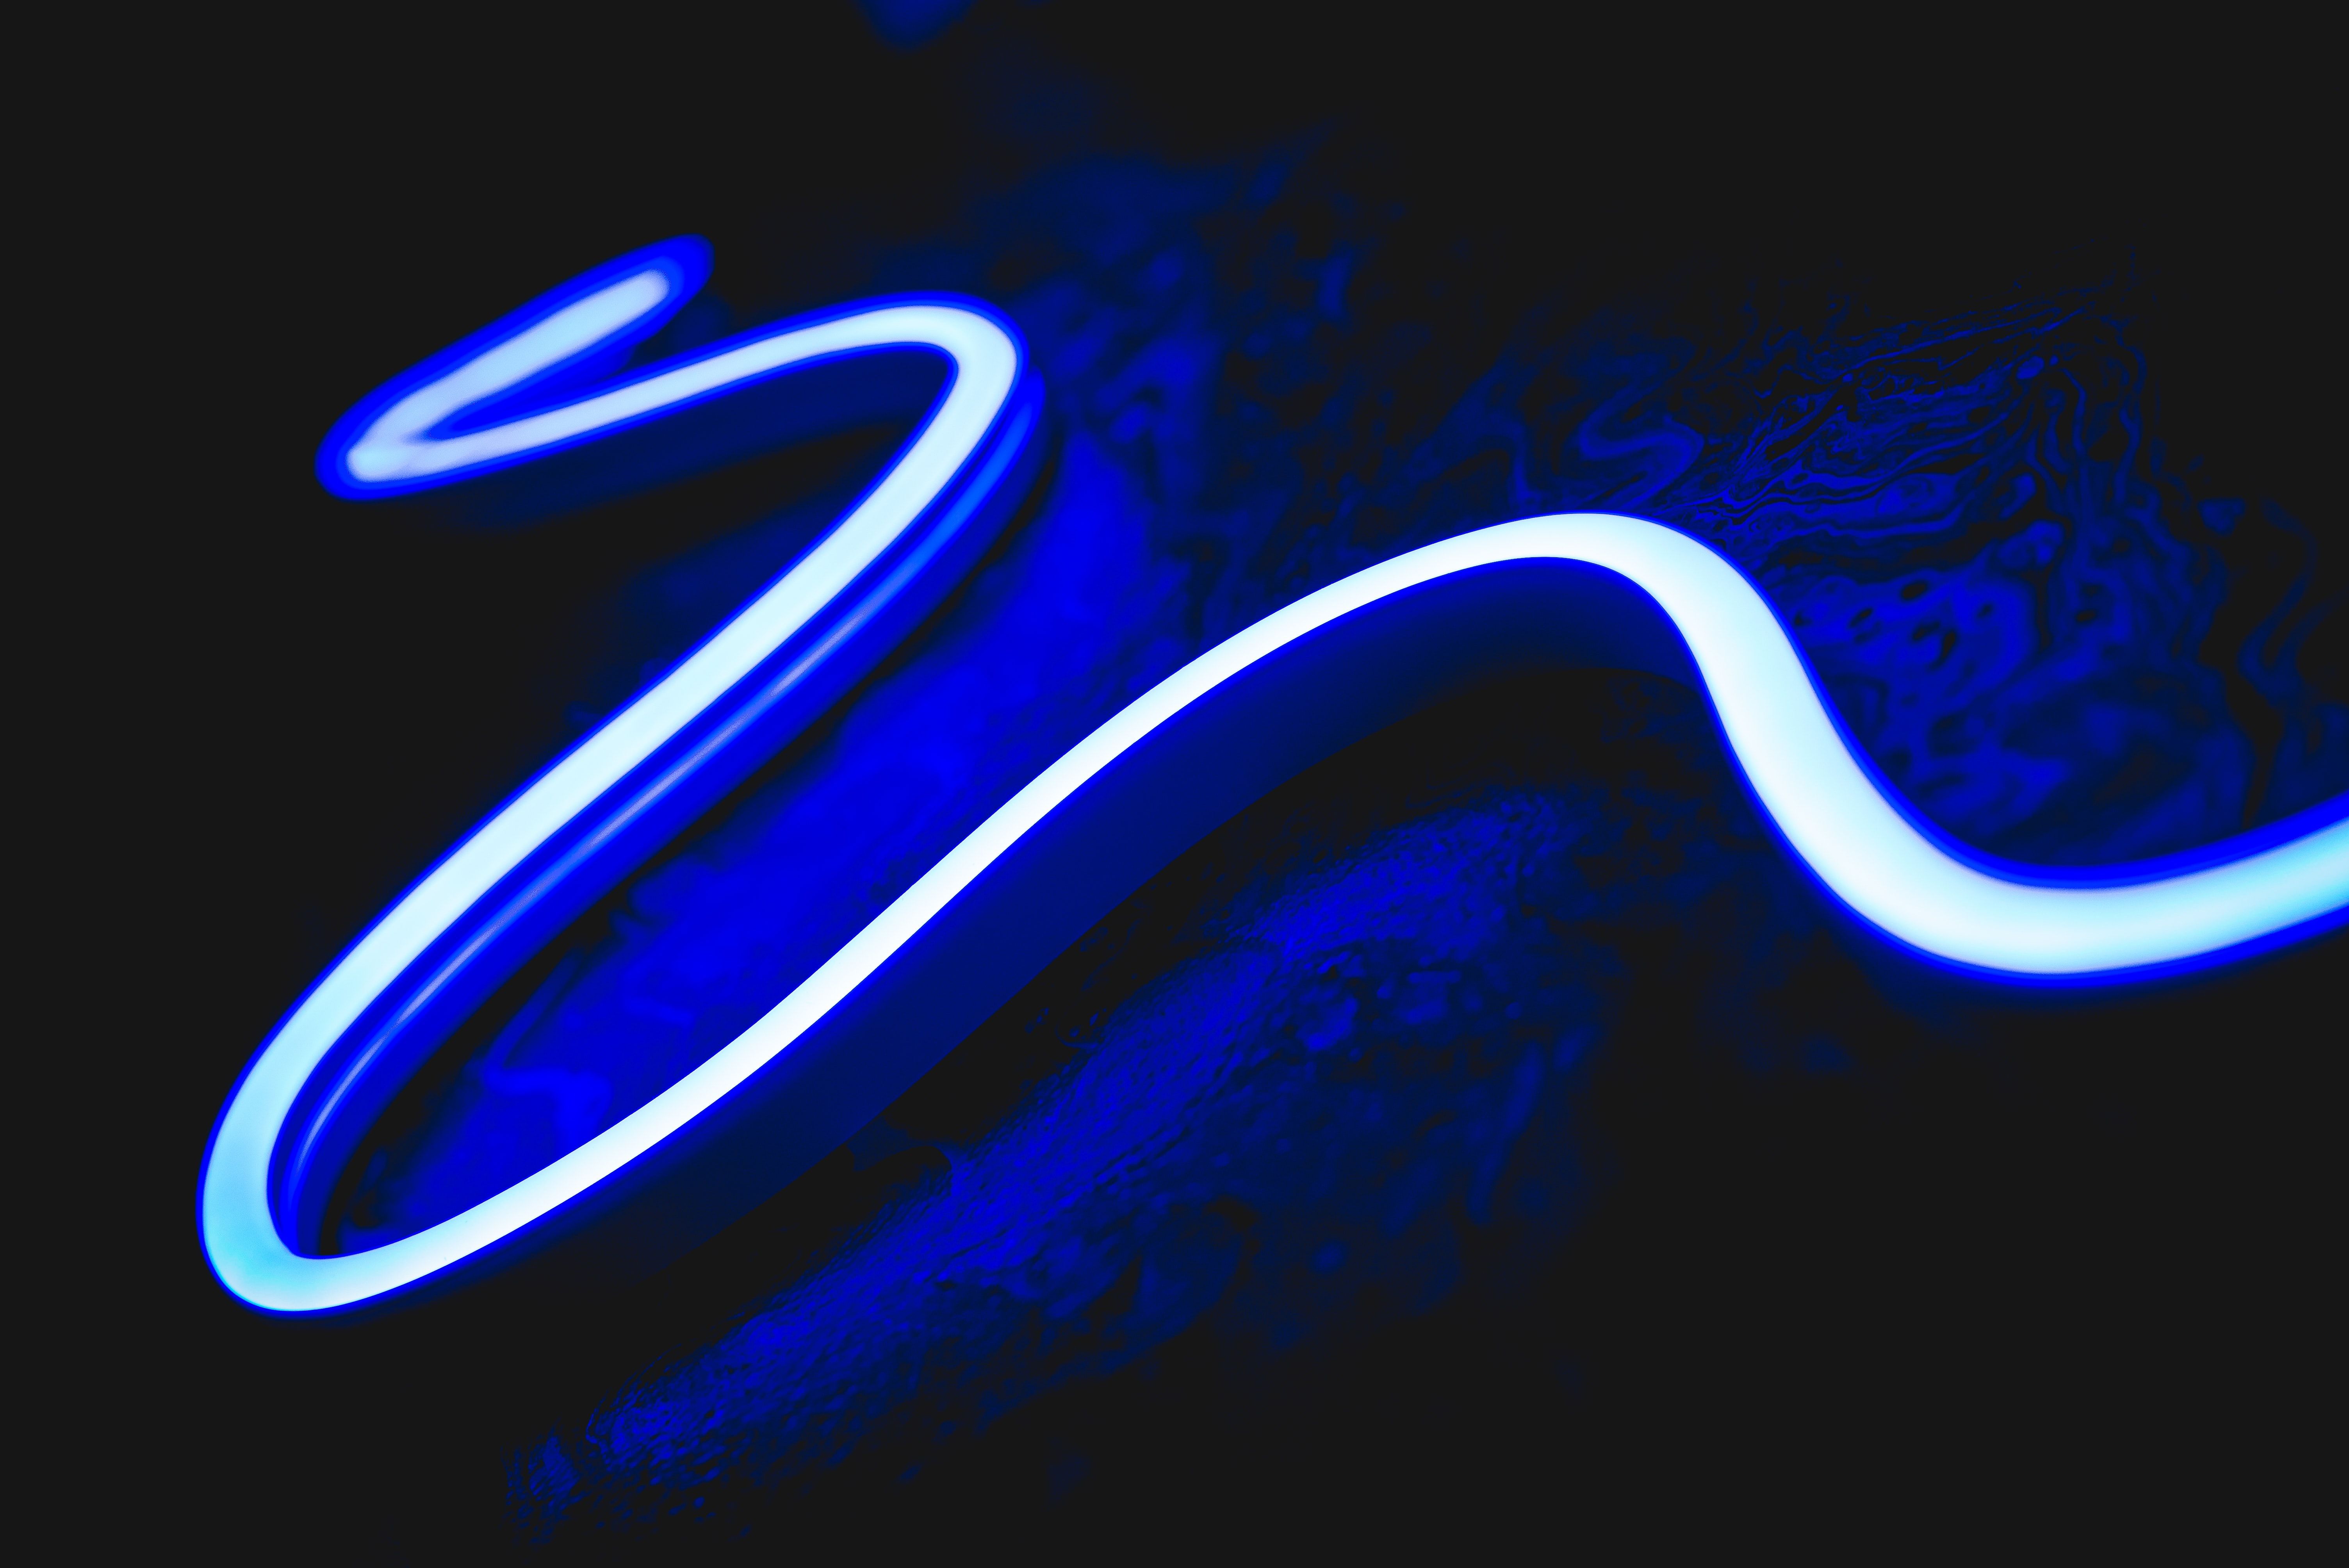 A blue neon light is shining on the wall - Neon blue